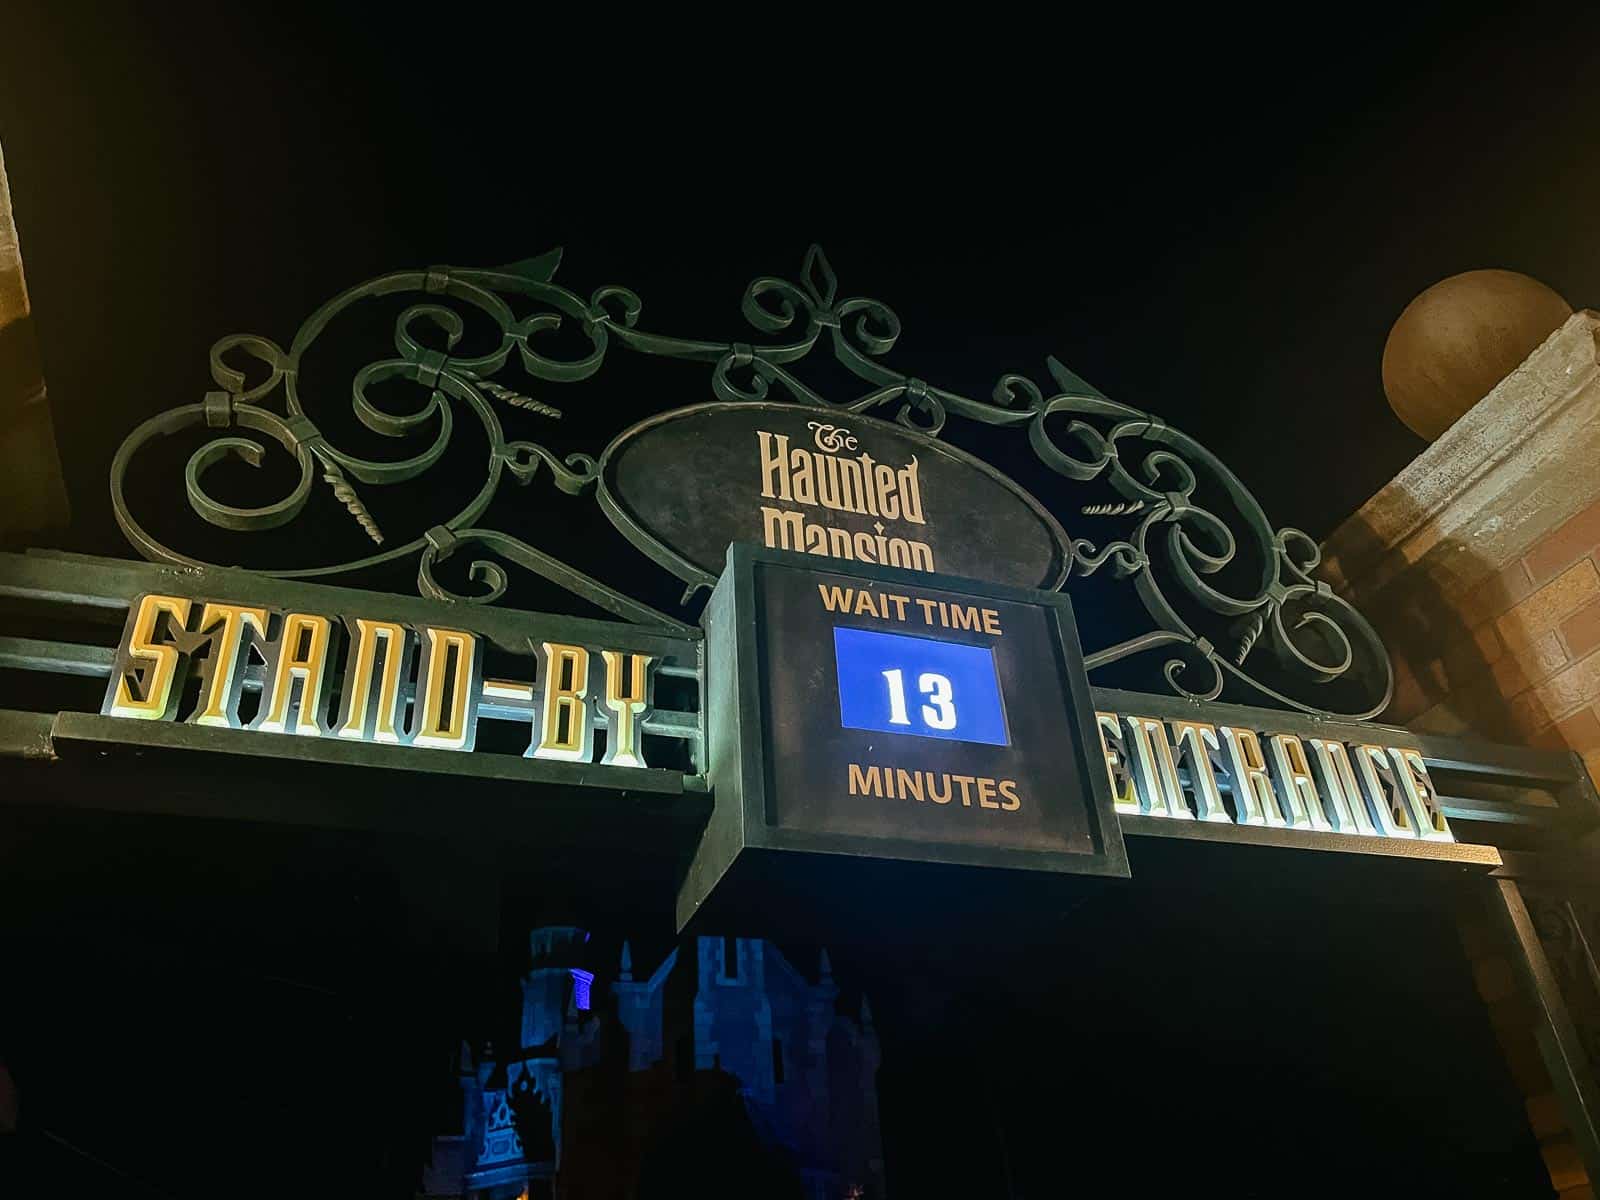 entrance to Haunted Mansion had a 13 minute posted wait during After Hours 